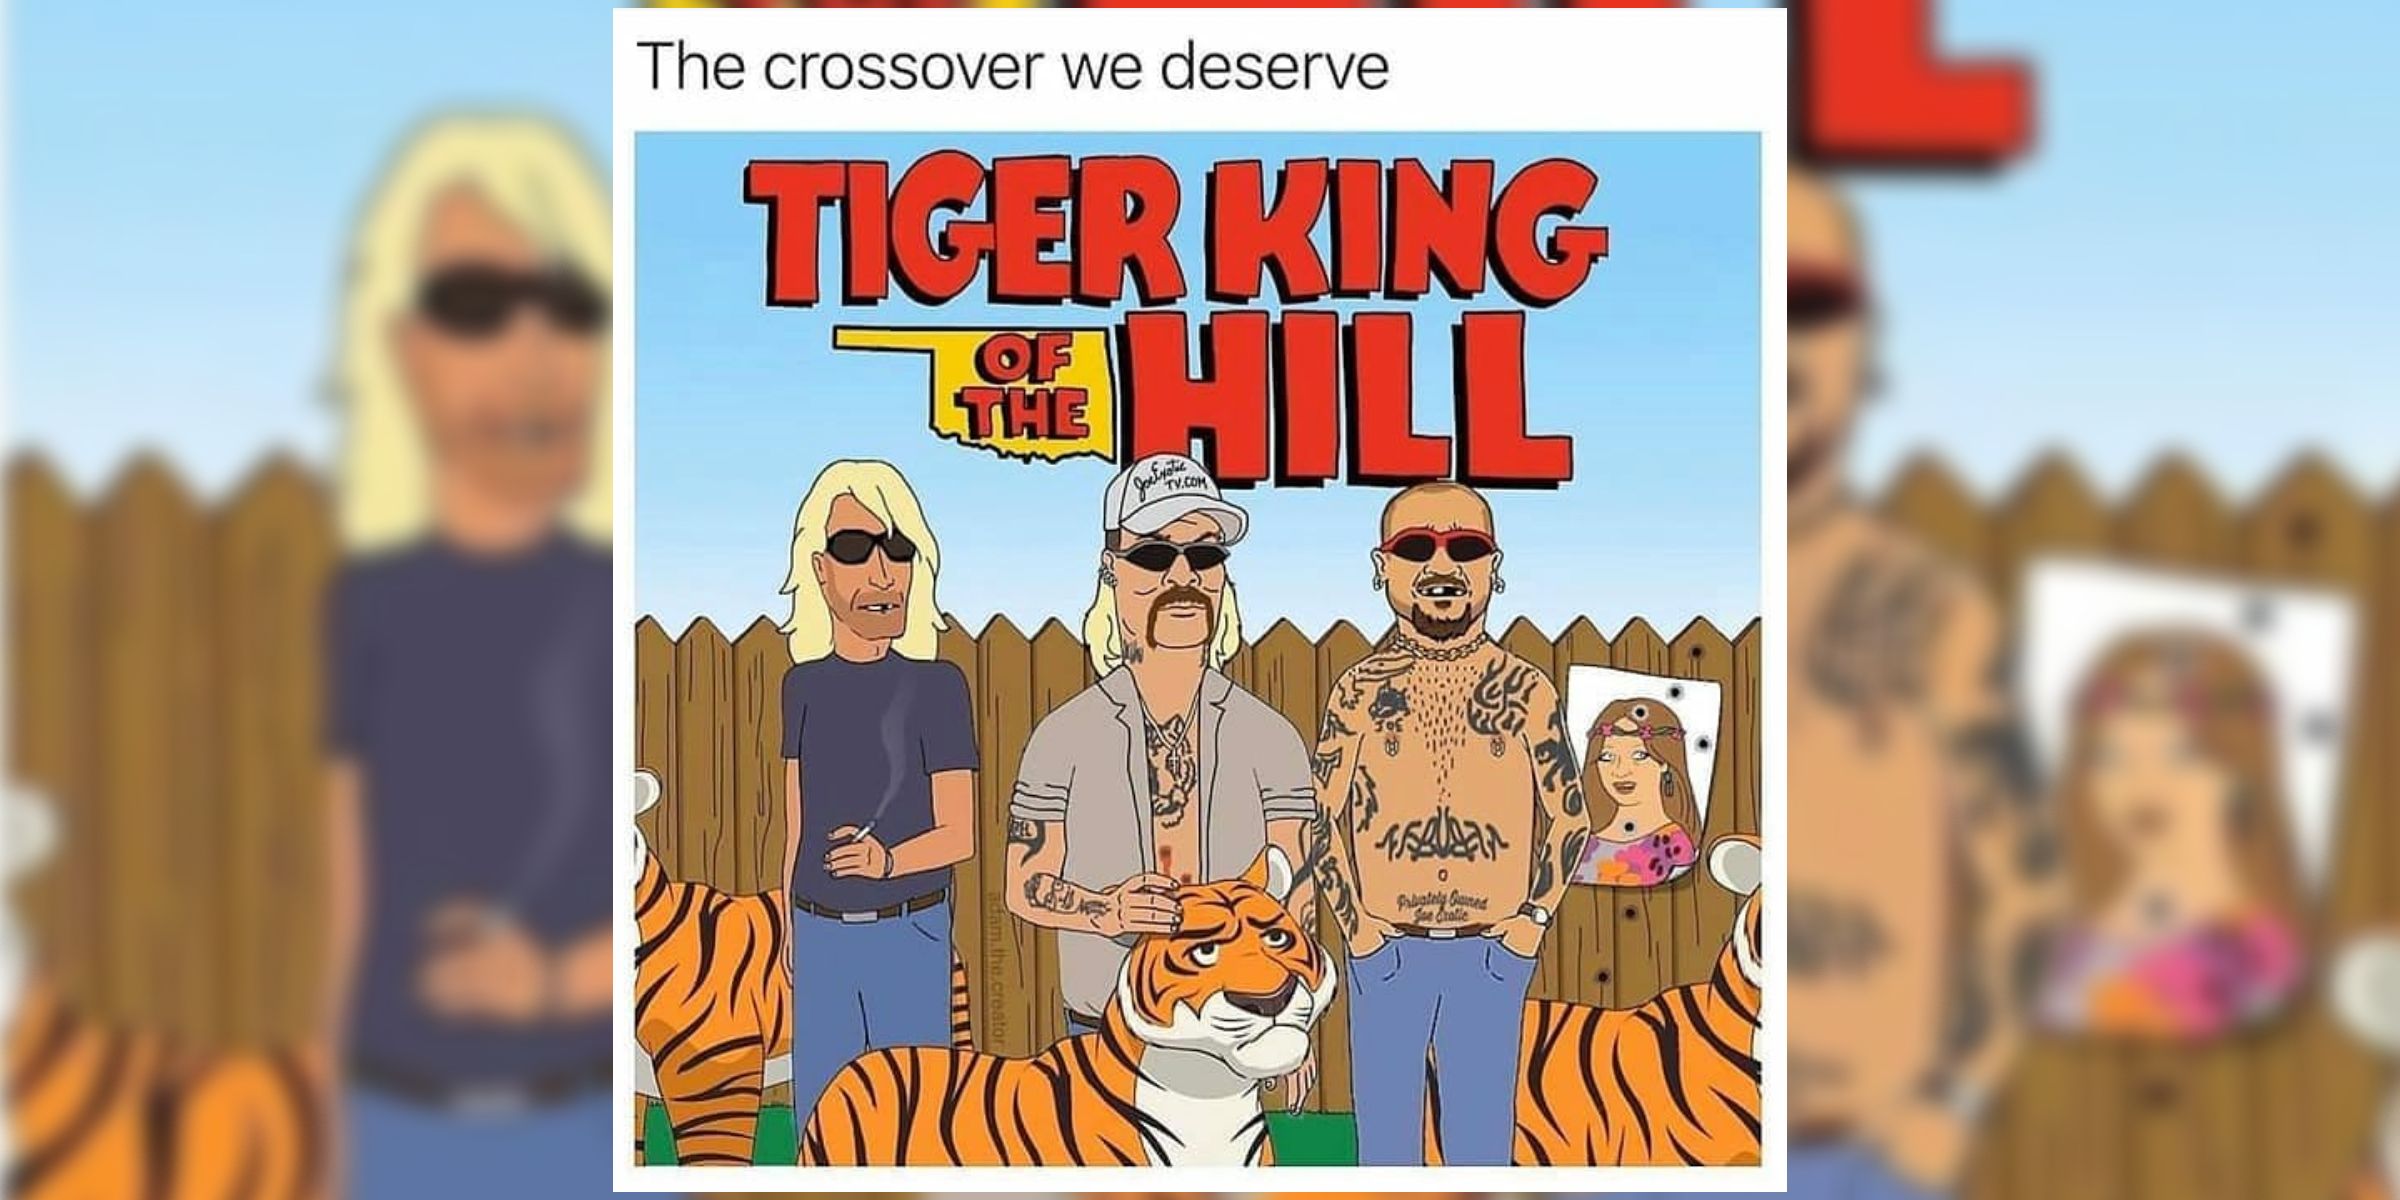 A crossover between Netflix's Tiger King and King of the Hill.